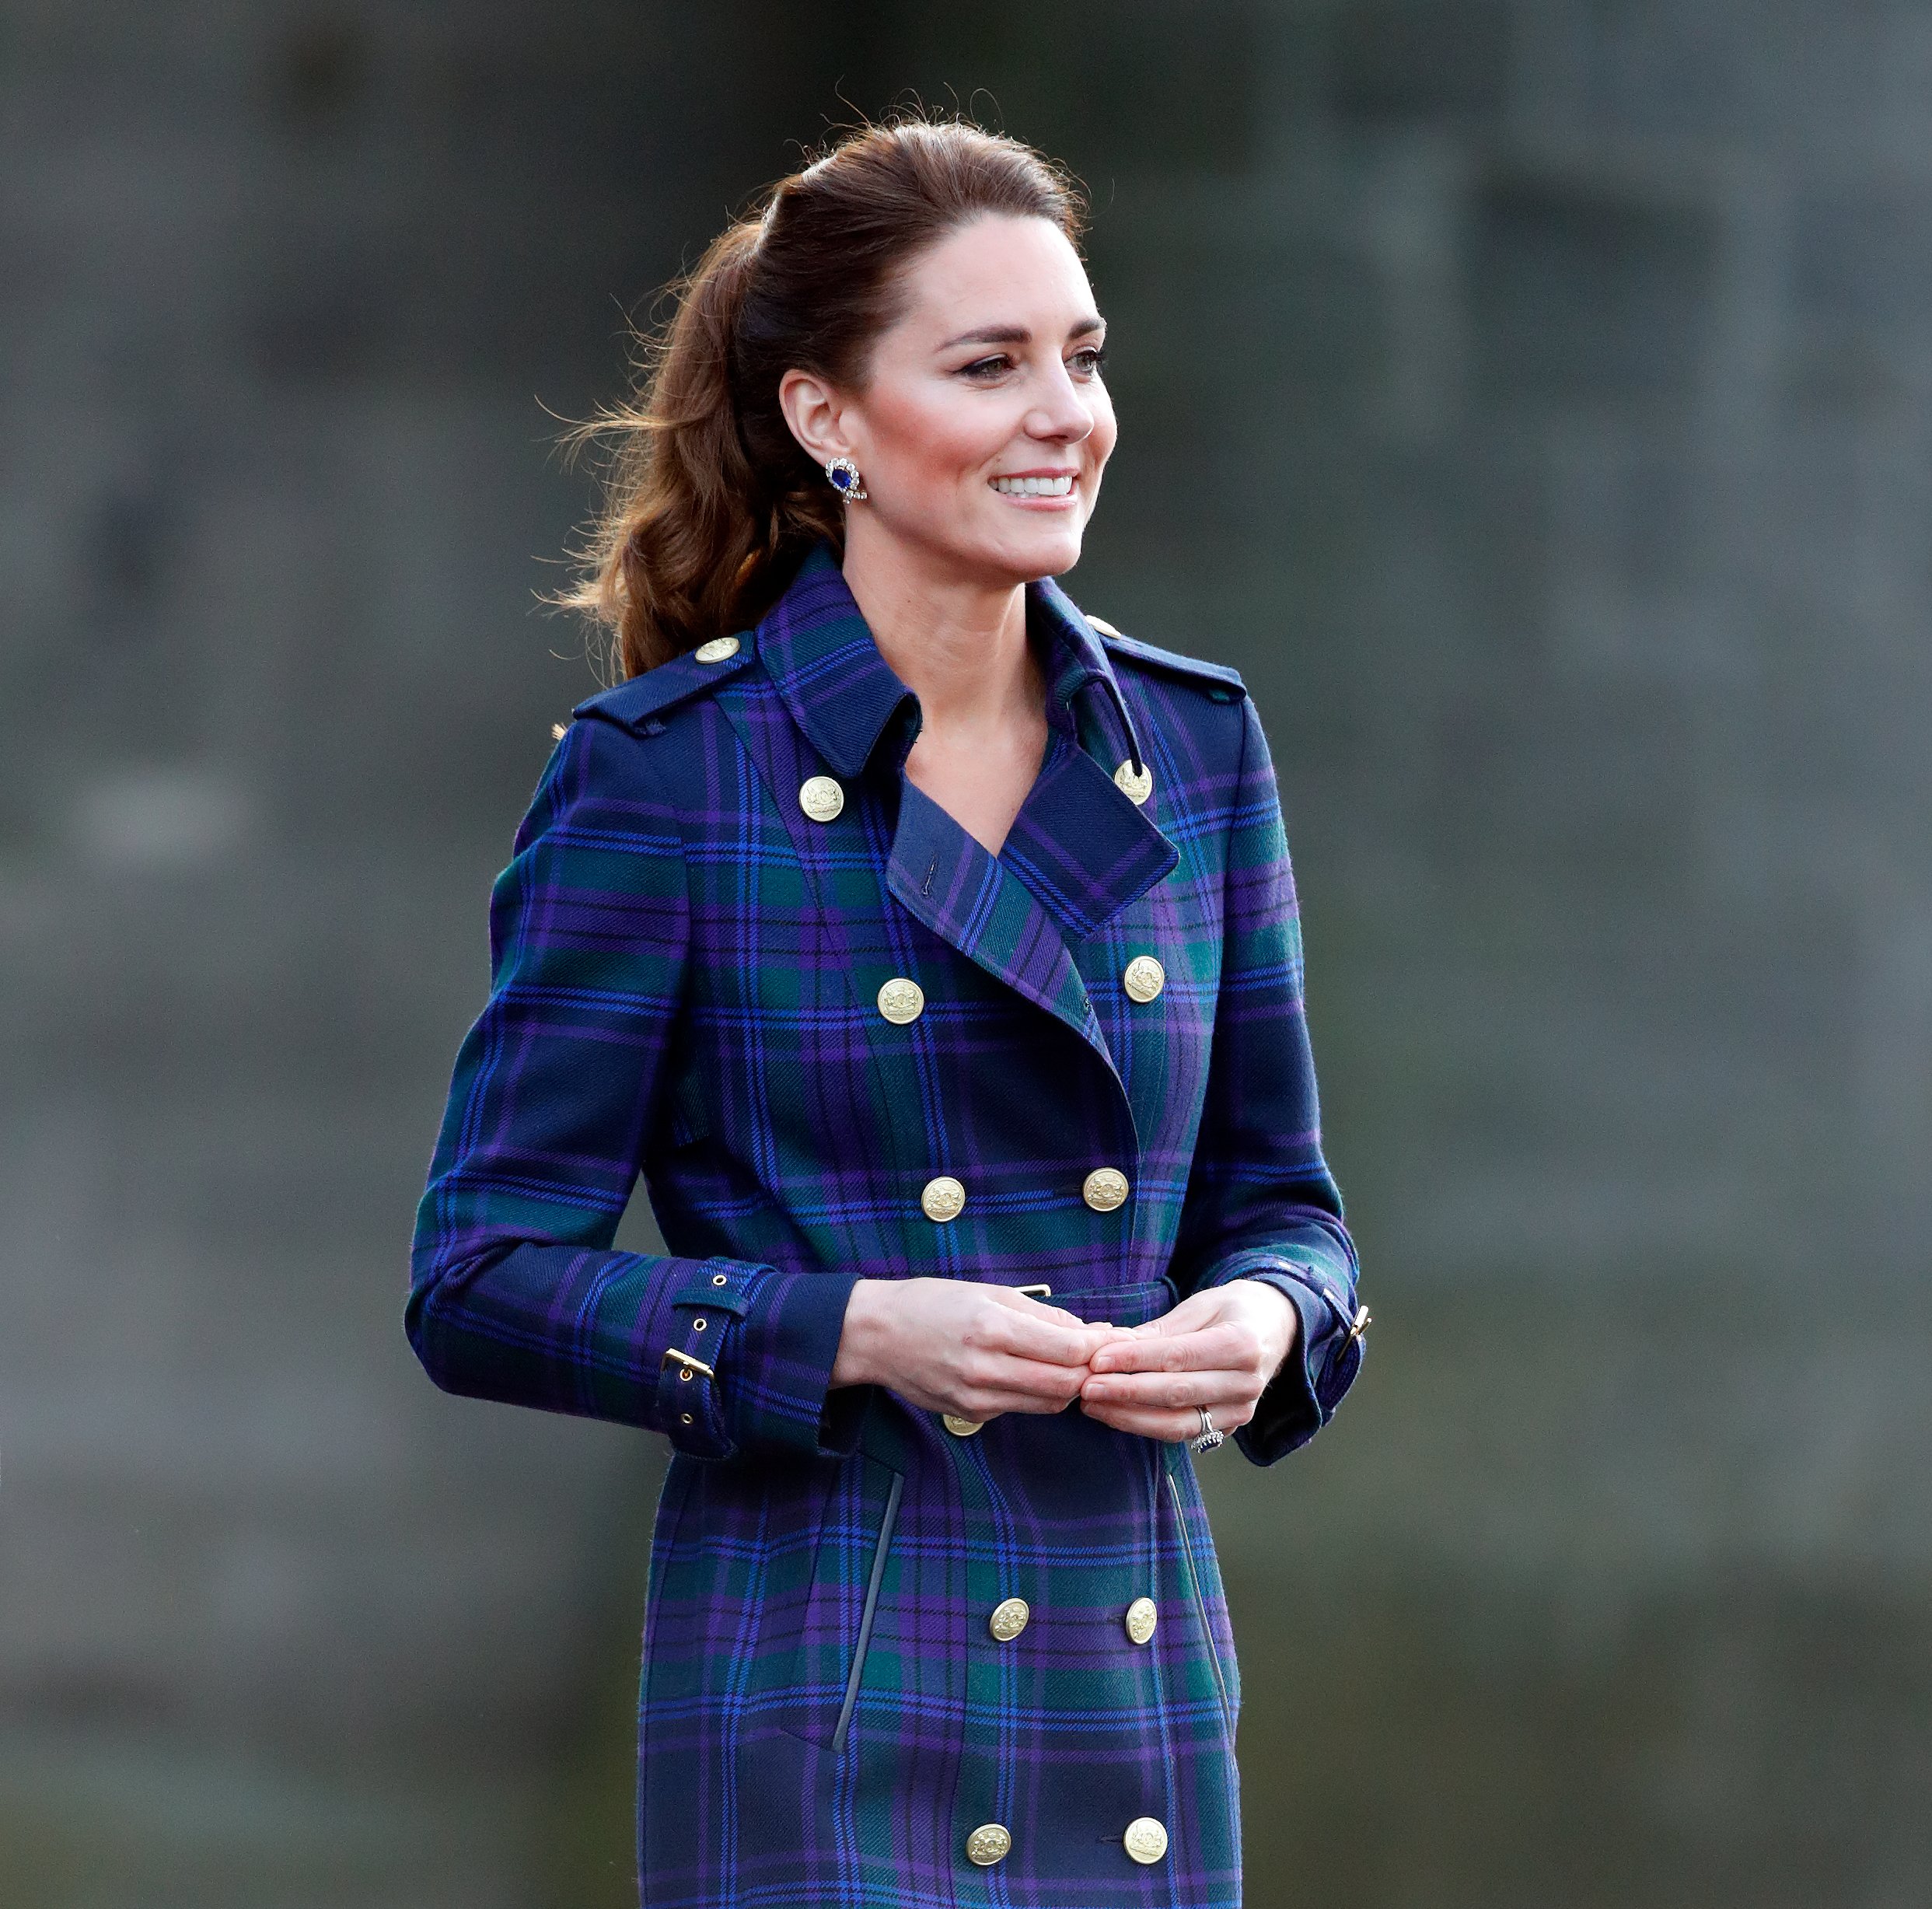 Kate Middleton hosting a drive-in cinema screening of "Cruella" for Scottish NHS workers at The Palace of Holyroodhouse on May 26, 2021 in Edinburgh, Scotland. / Source: Getty Images